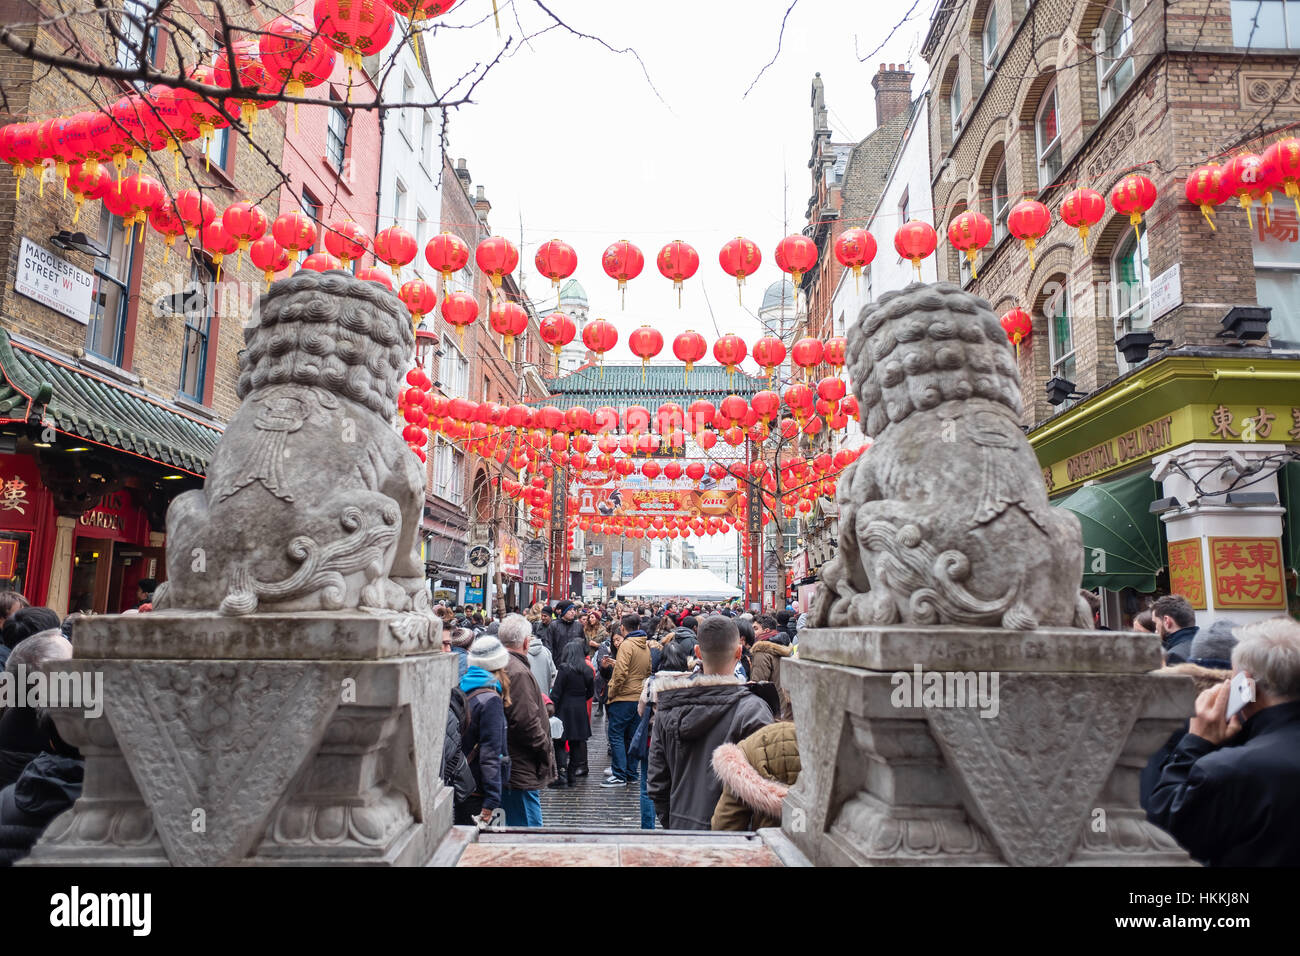 London, UK. 29th Jan, 2017. Chinese New Year parade/celebrations in London, marking the start of the Year of the Rooster. Credit: ilyas Ayub/Alamy Live News Stock Photo